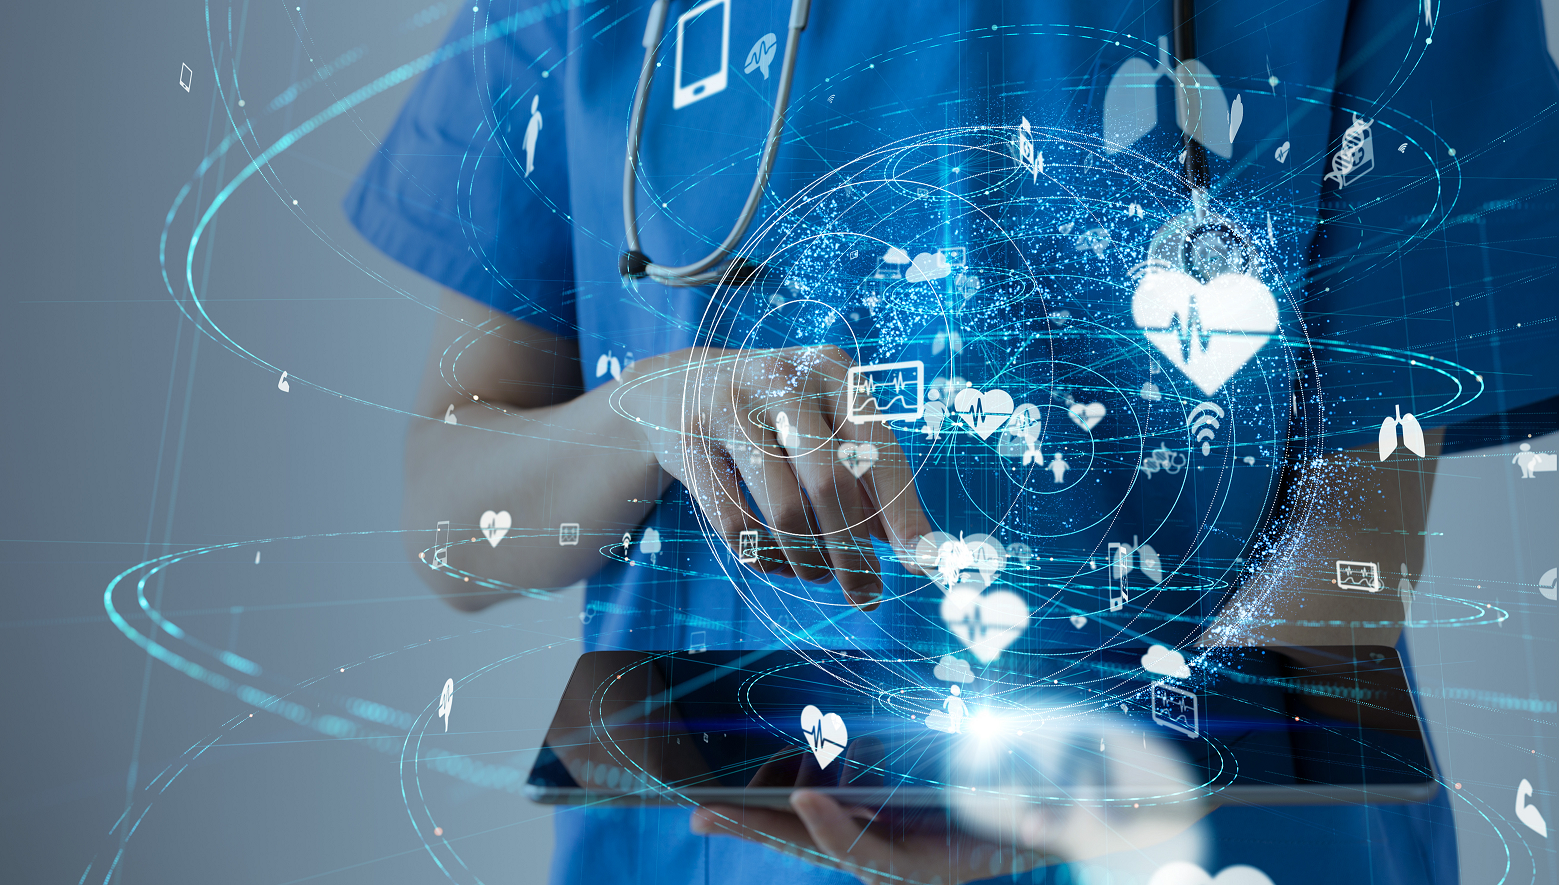 Workforce Tech in Healthcare: Developing Tools for Existing Challenges